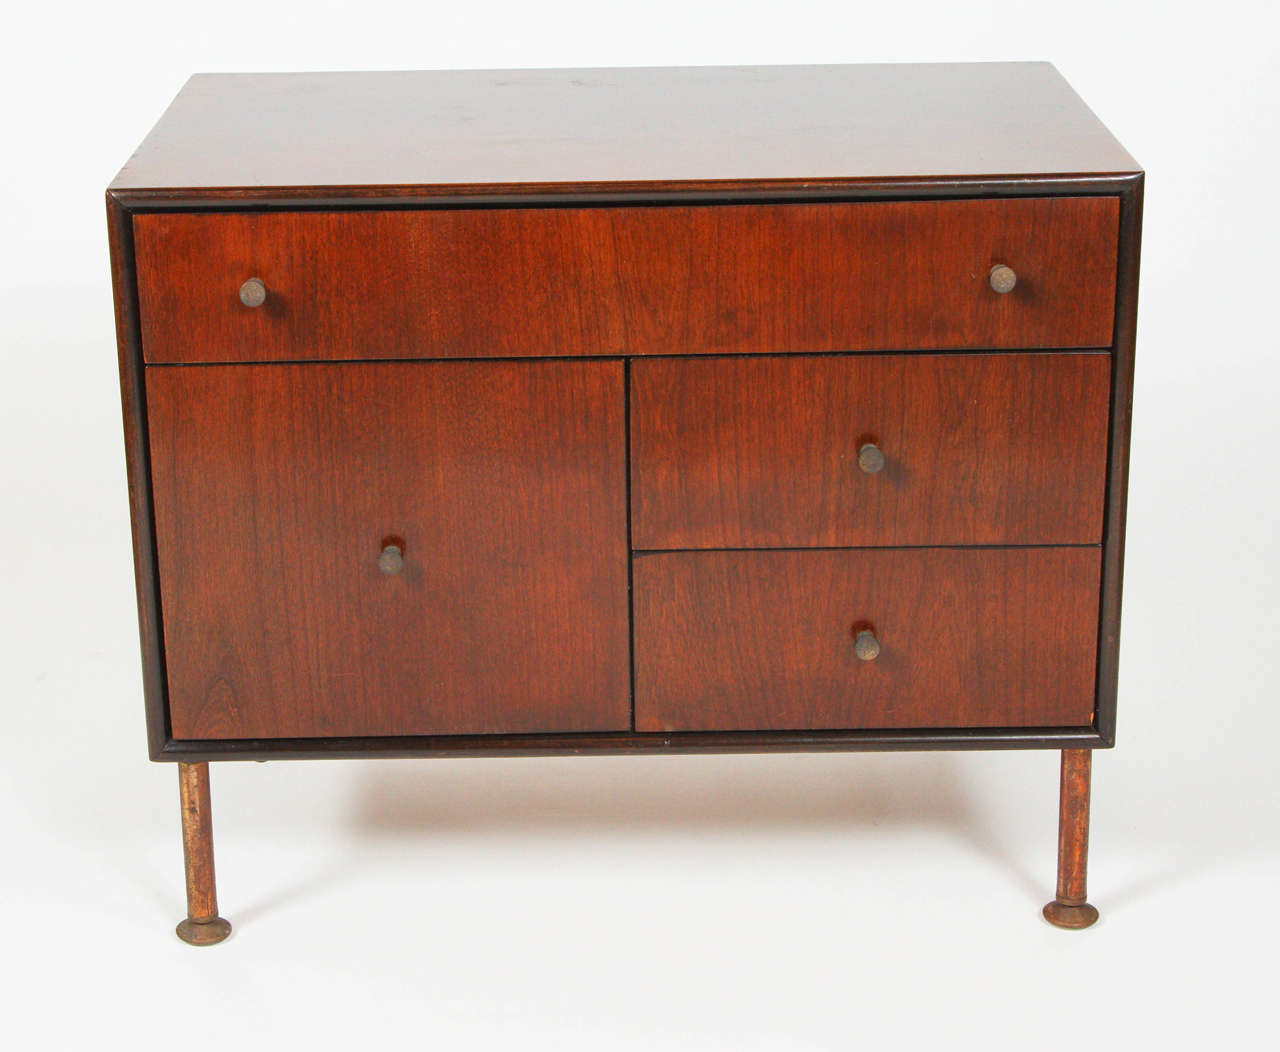 Chairside chest in cherry with antiqued brass legs and pulls by Milo Baughman for Direcitonal, 1965.